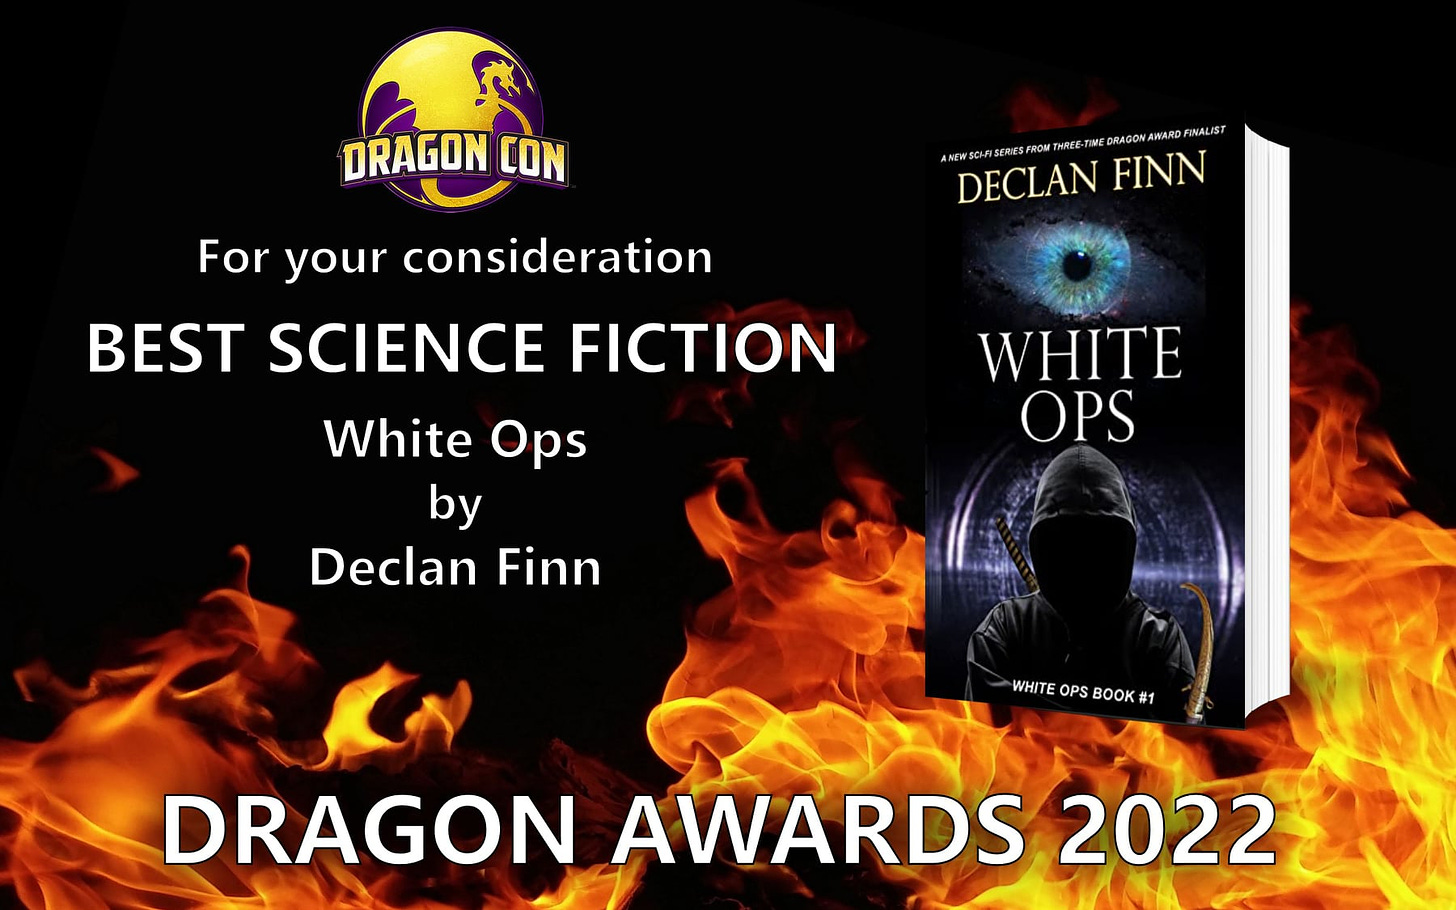 May be an image of 1 person, fire and text that says 'DRAGON CON For your consideration BEST SCIENCE FICTION DE DECLAN FINN White Ops by Declan Finn WHITE OPS WHITE OPS BOOK #1 DRAGON AWARDS 2022'